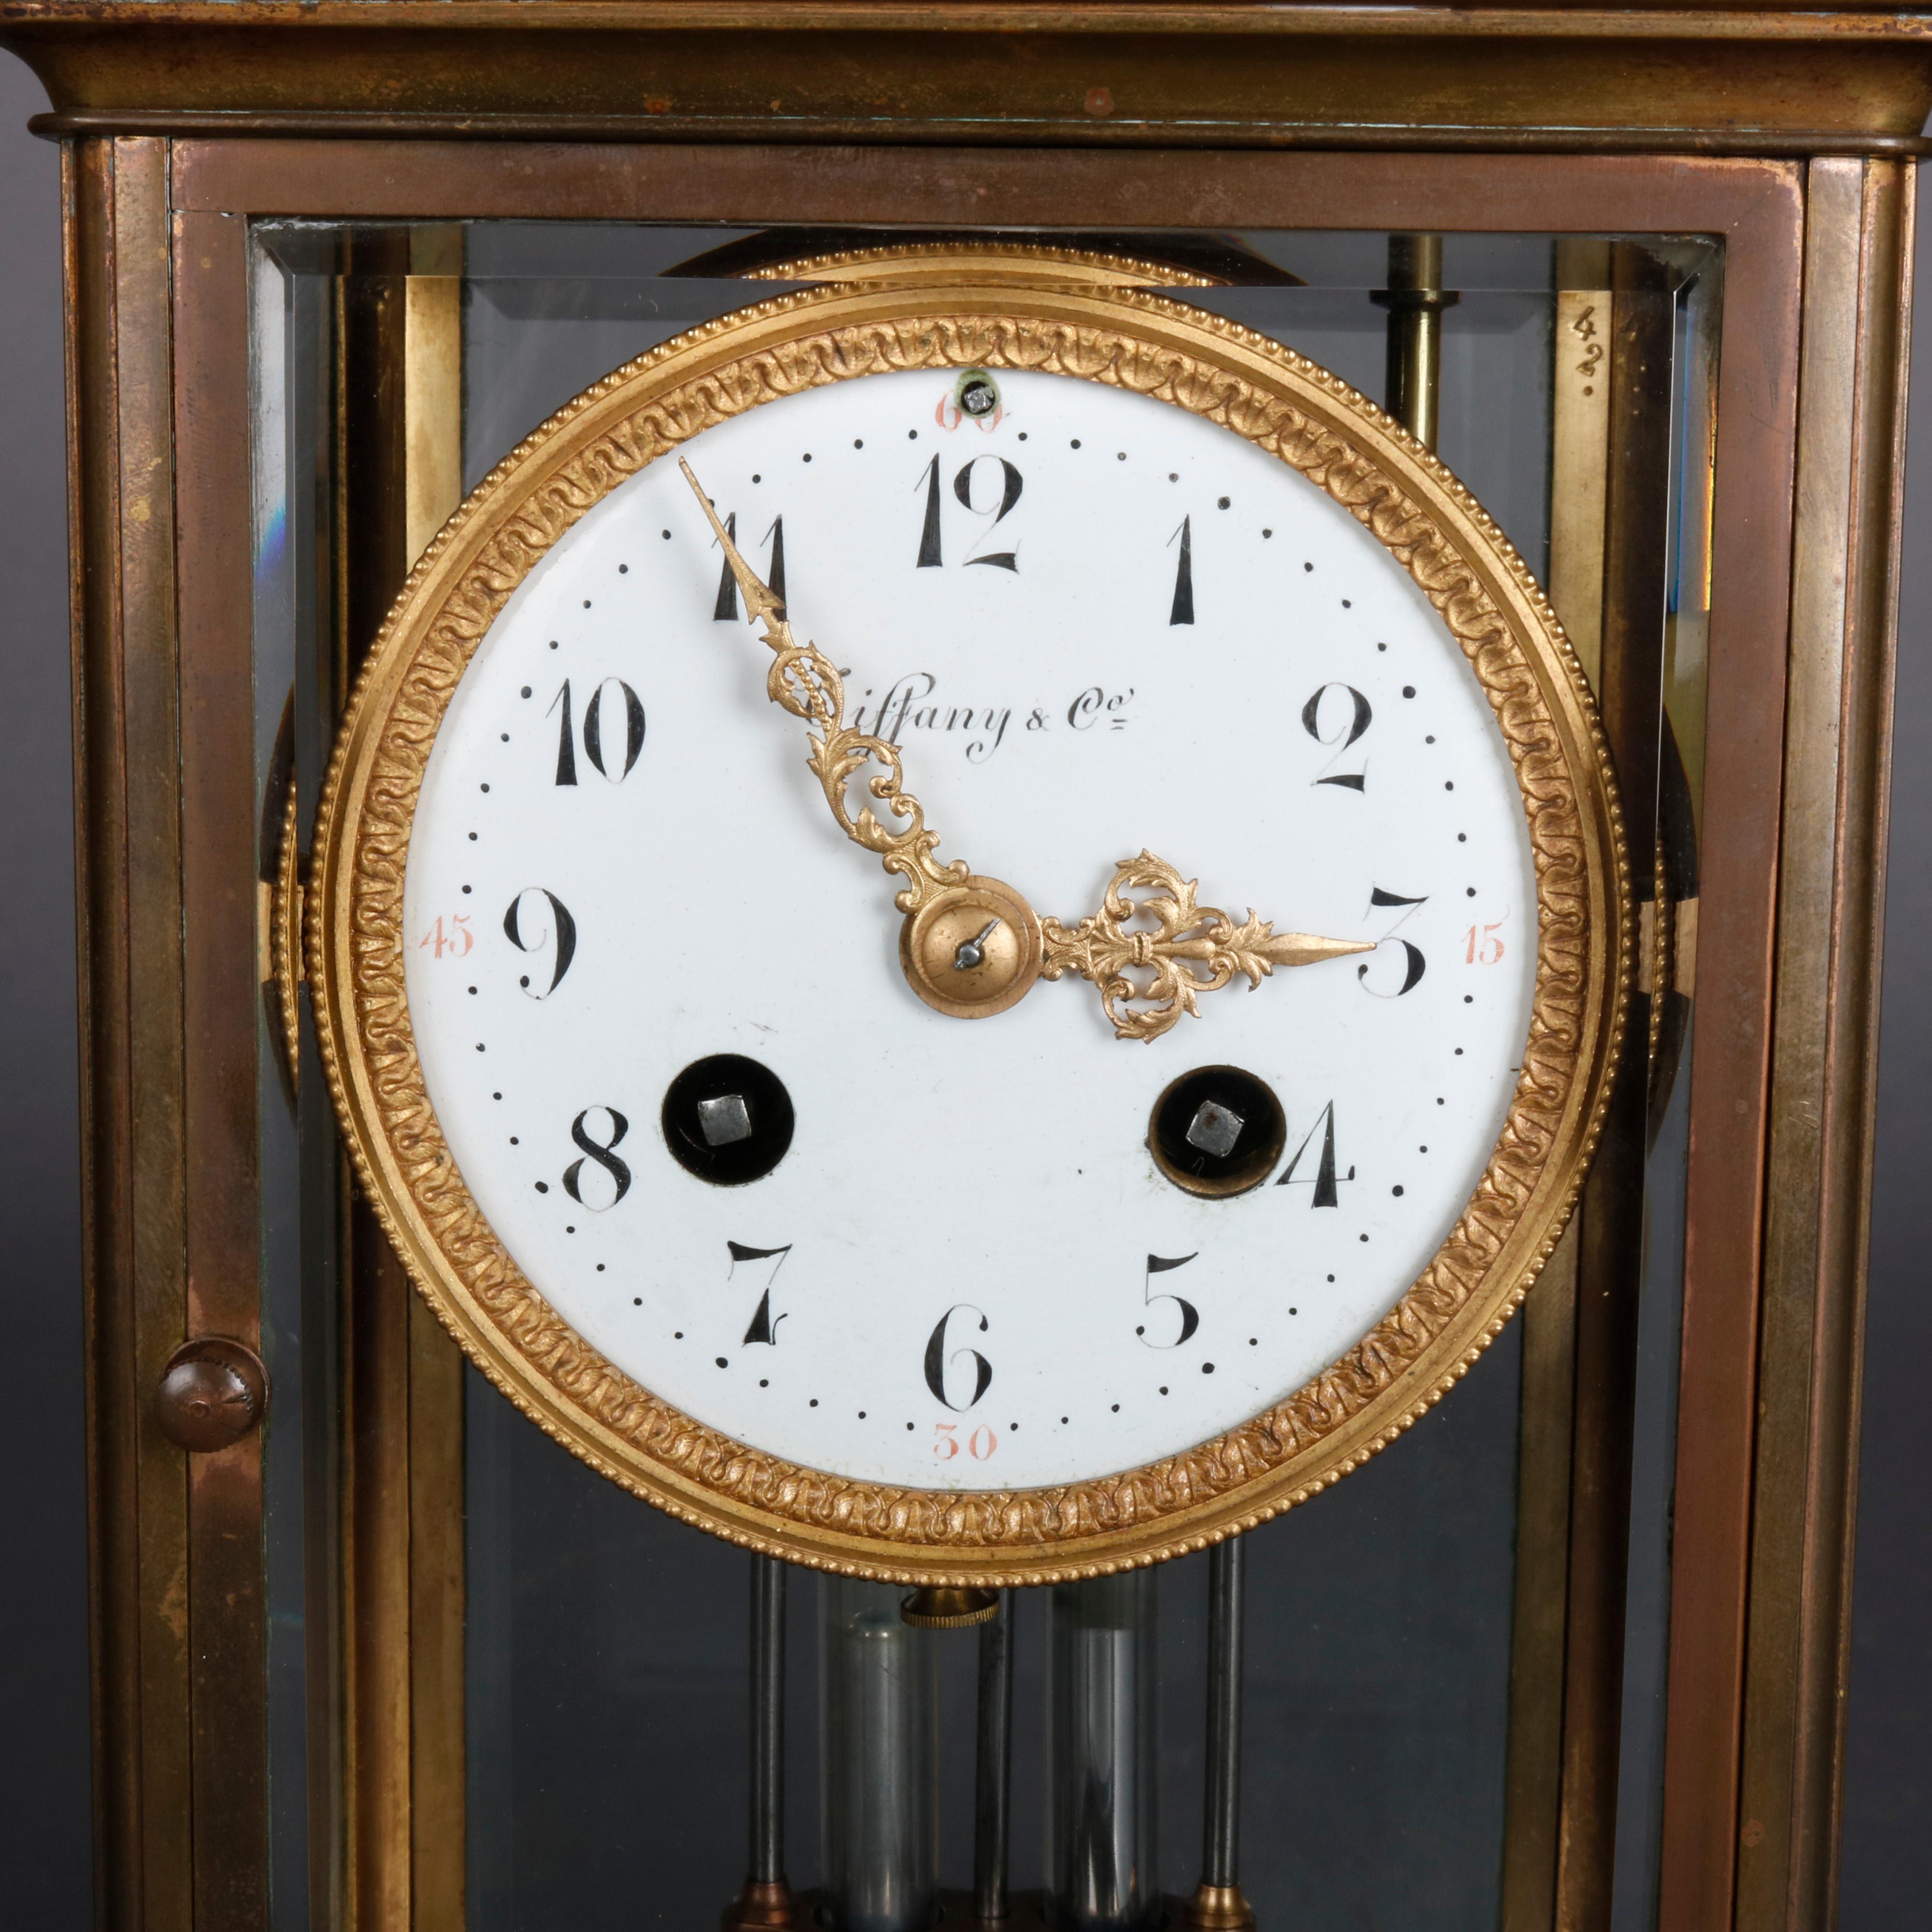 An antique regulator mantel clock by Tiffany & Co. offers brass frame with works house in beveled crystal case, face signed as photographed, circa 1890

***DELIVERY NOTICE – Due to COVID-19 we are employing NO-CONTACT PRACTICES in the transfer of